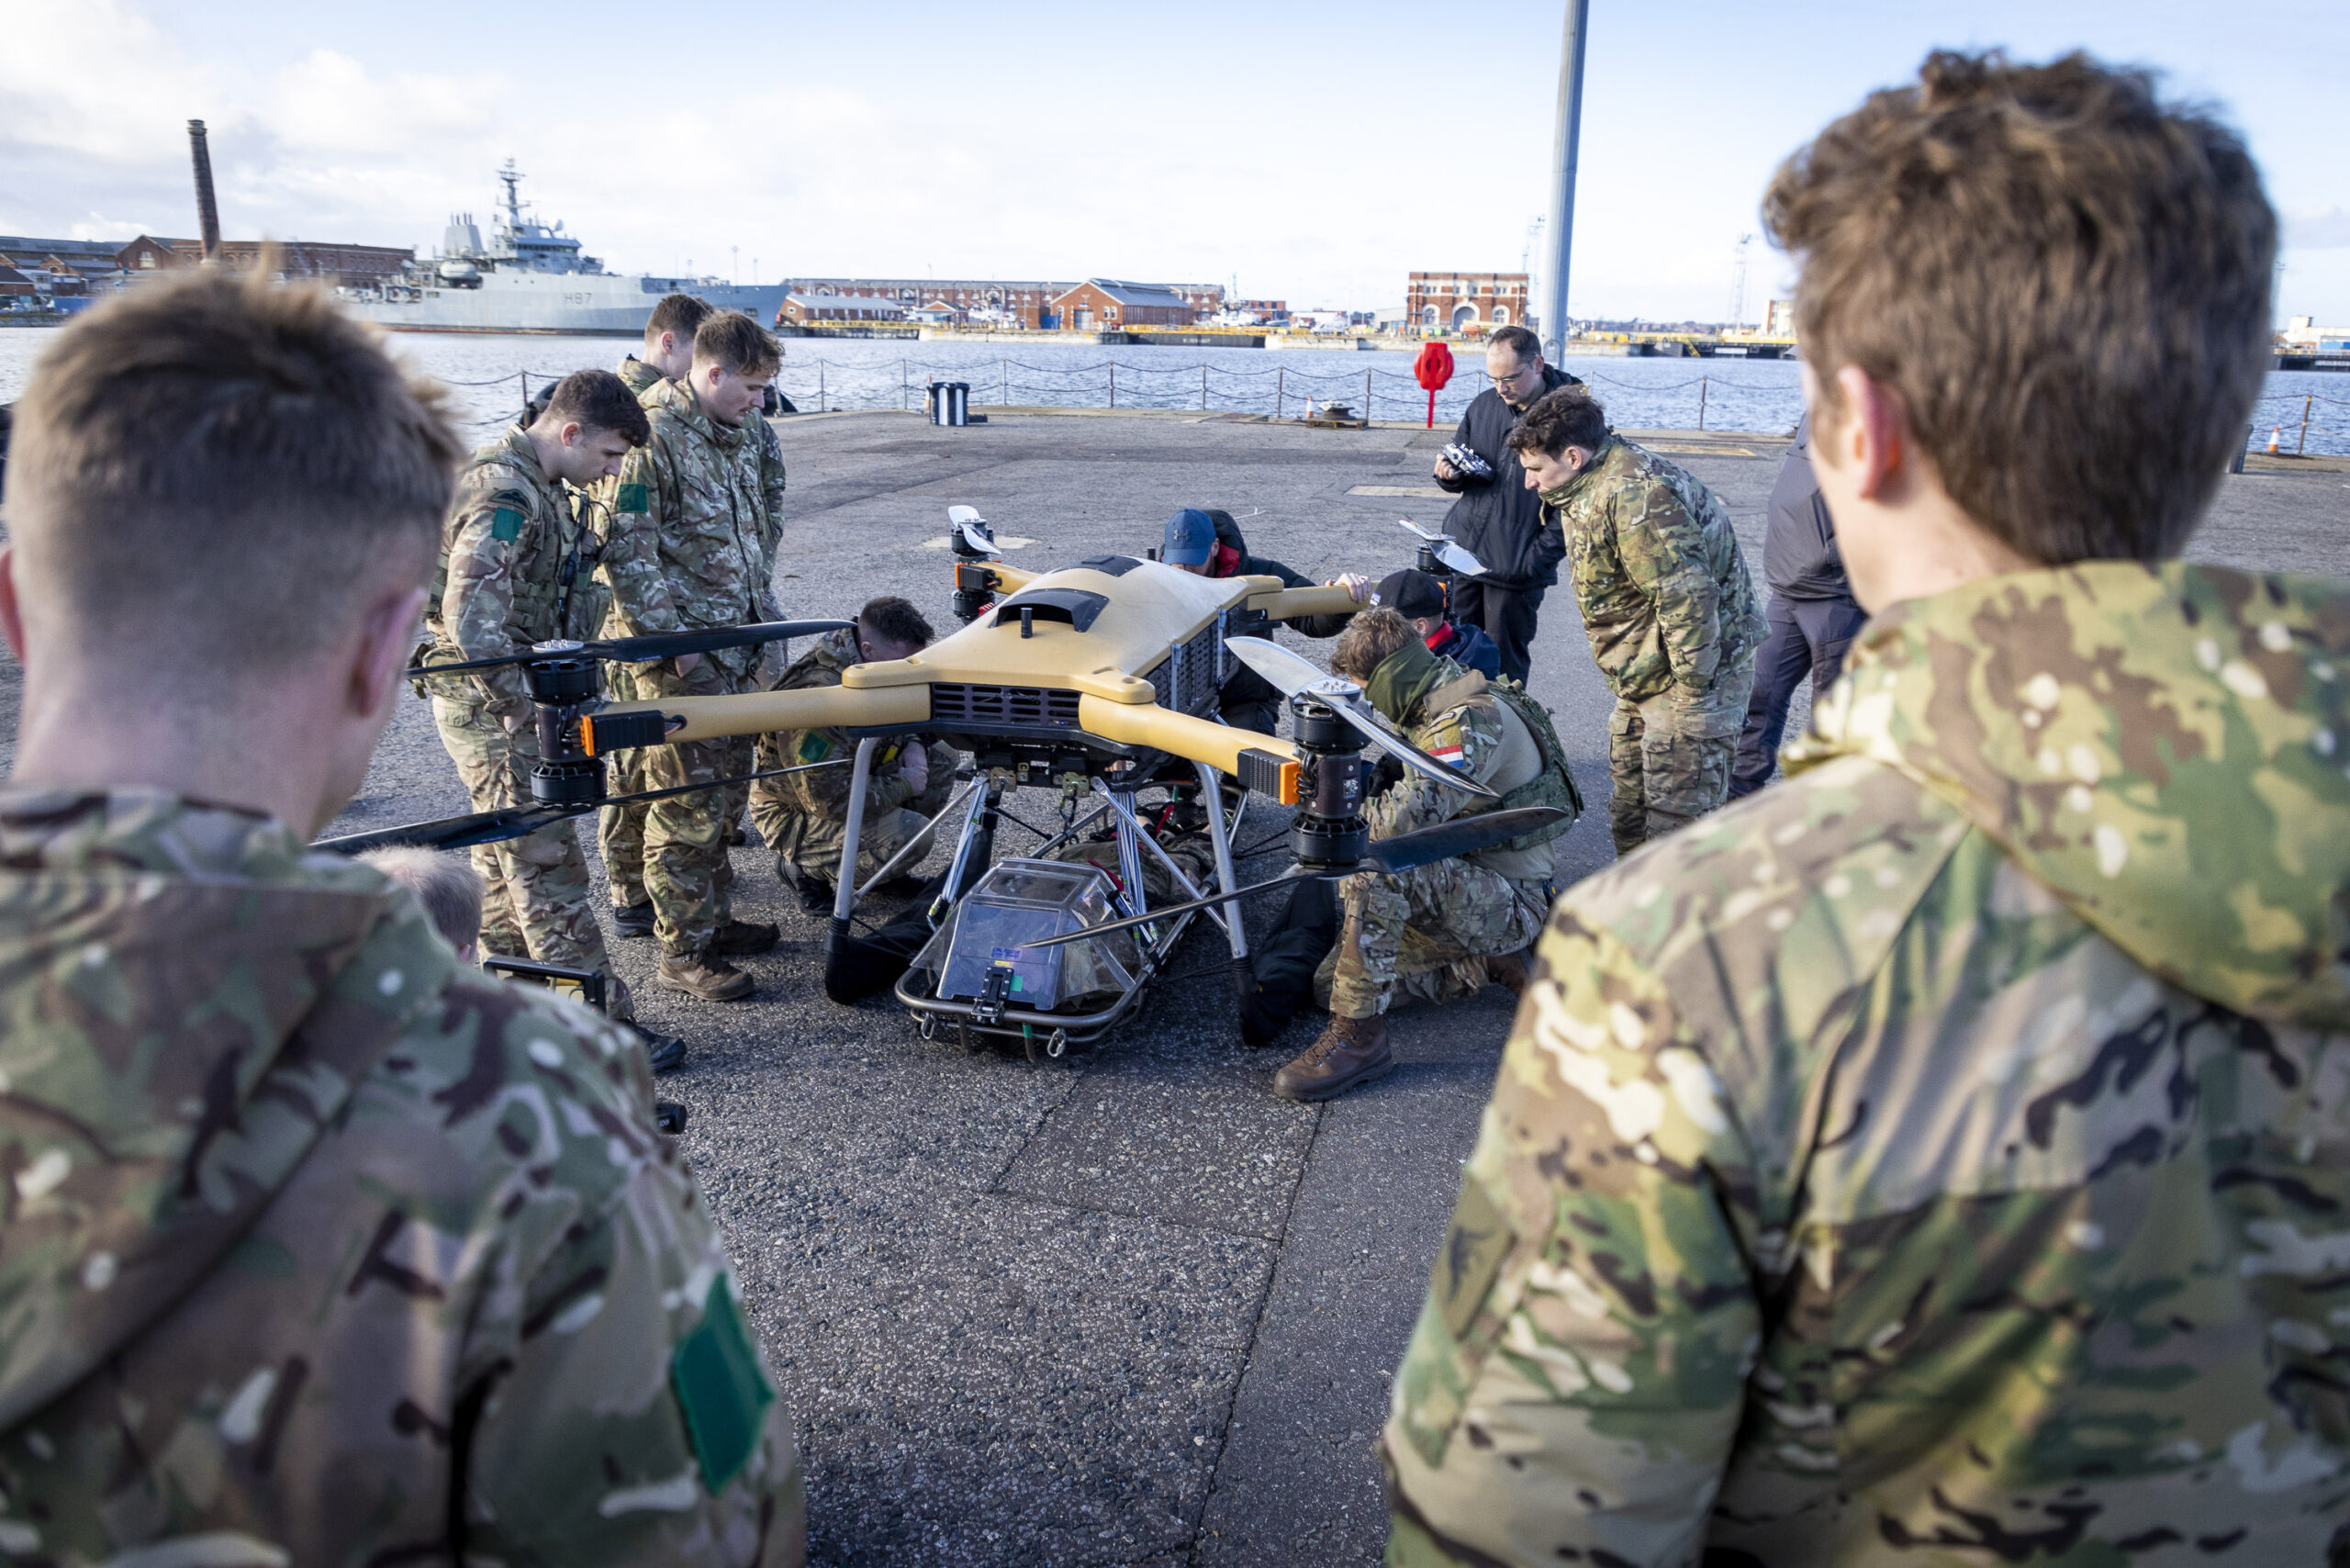 Troops test the abilities of the Hydra XL 300 to evacuate a simulated casualty.